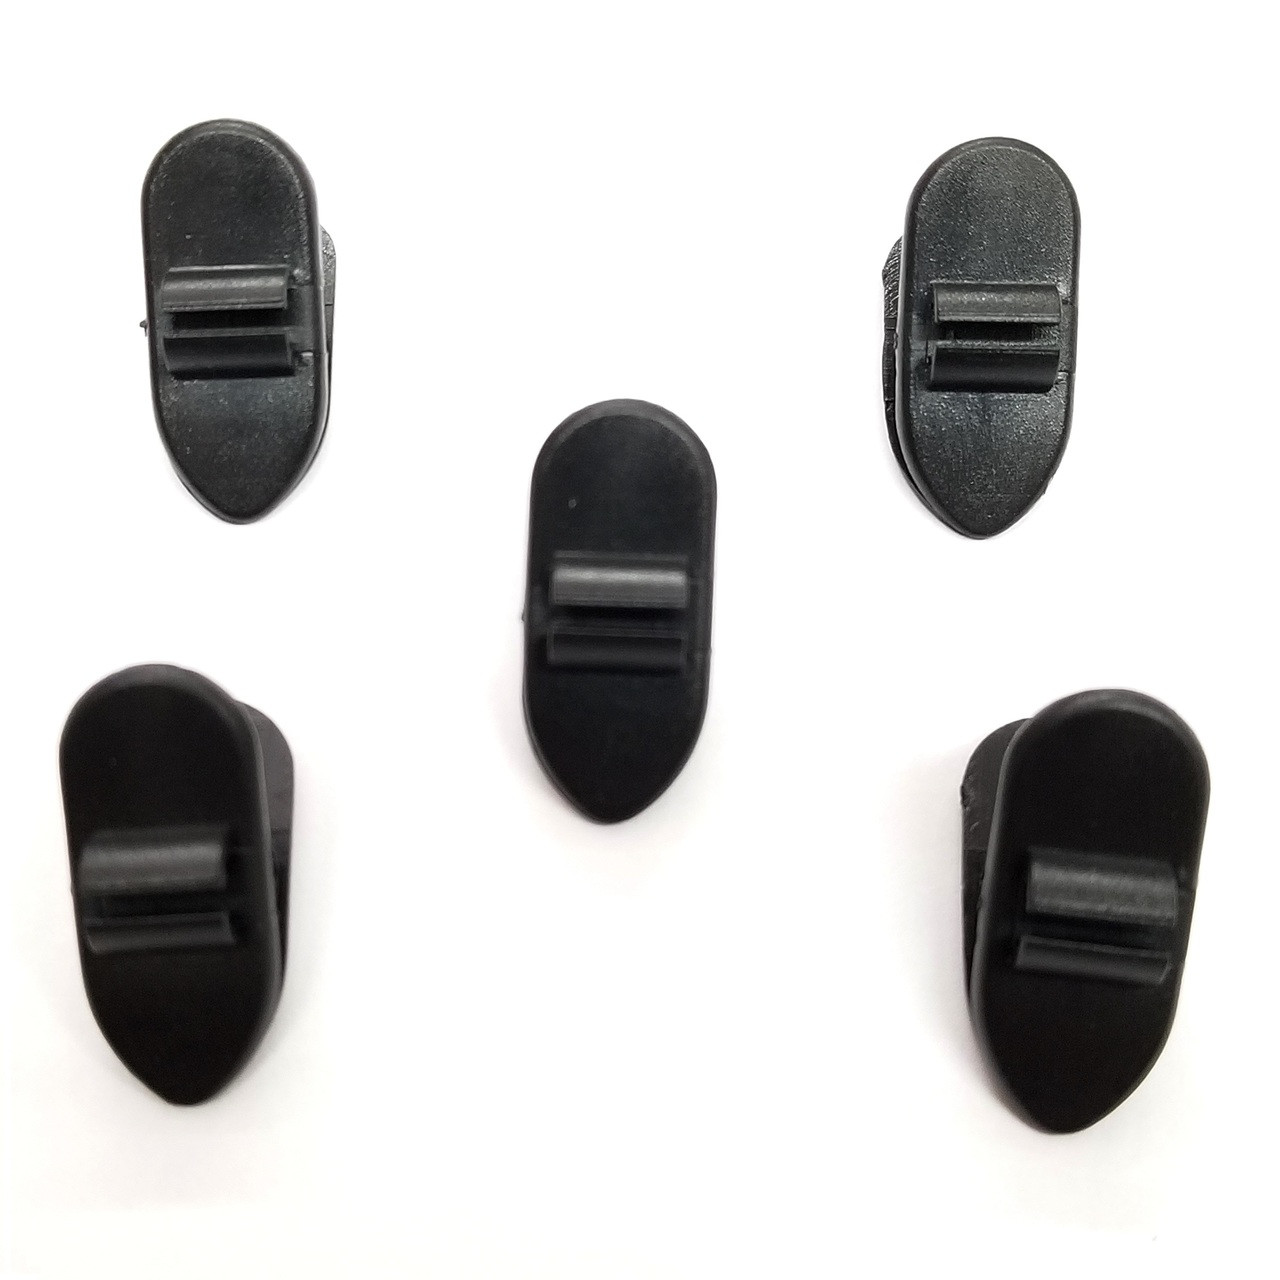 Clips for Earphone Wire, Headphone Mount Cable Clothing Clip, 5 Pcs Black  Clips for Most Headset, Pack of 5 (Black)